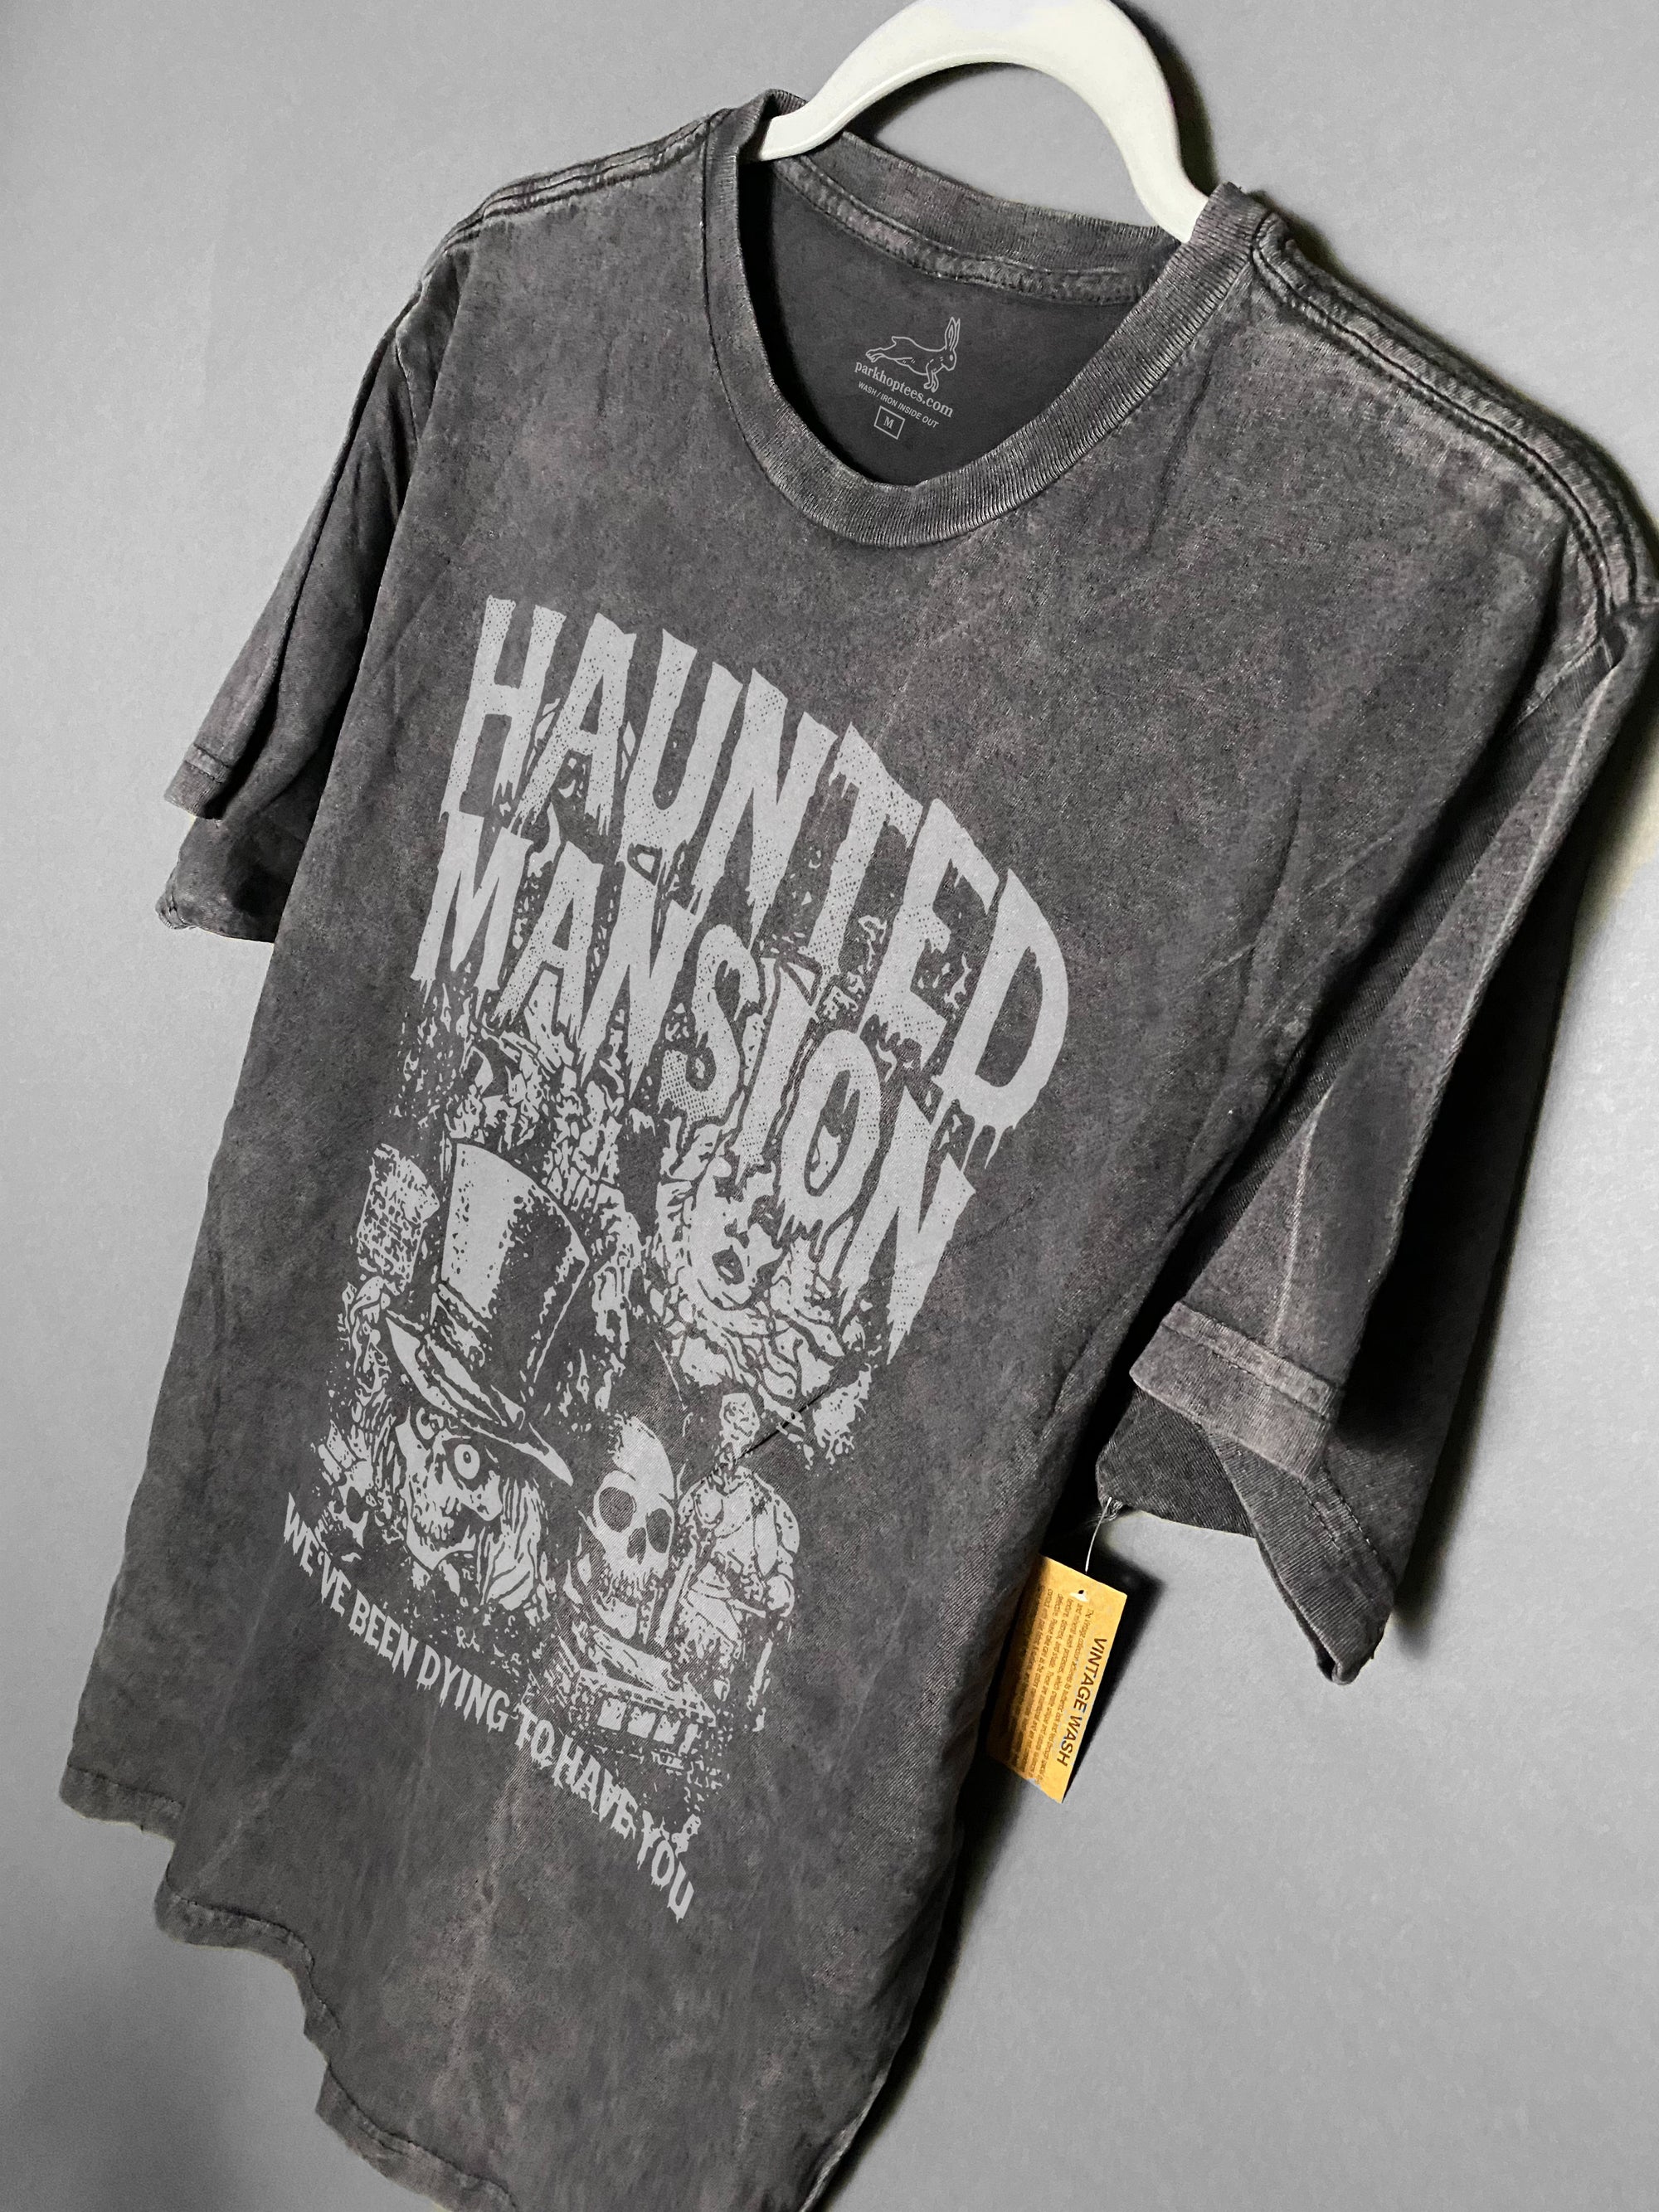 We designed this one of a kind tee Haunted Mansion tee only available at Park Hop Tees. This is made with the hatbox ghost, and madame leotta. We've been dying to have you